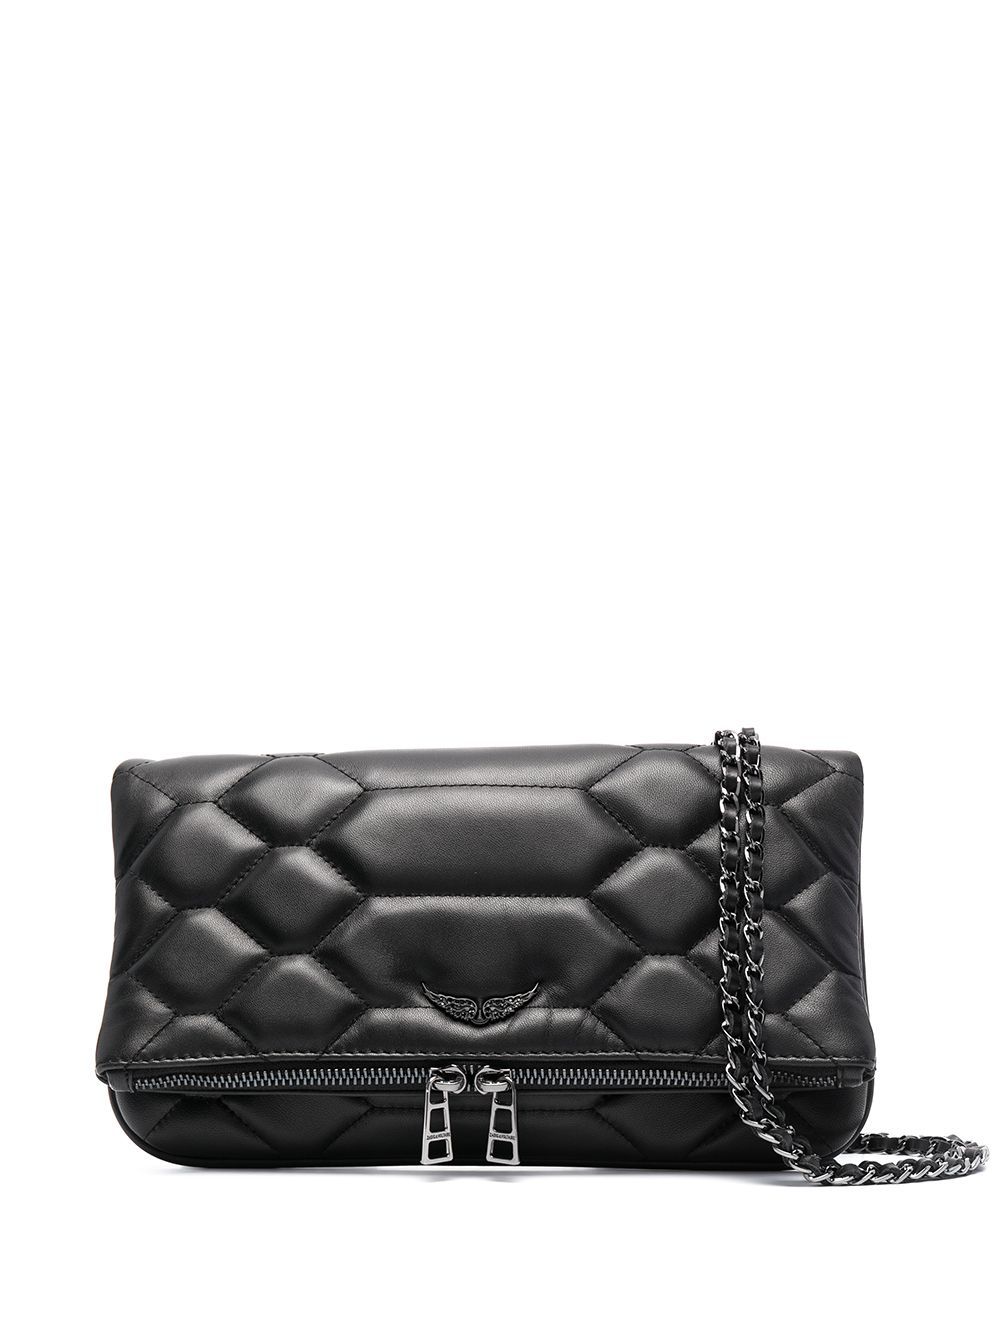 Top 15 Black Clutch Bag Outfit Ideas: Style Guide for Women